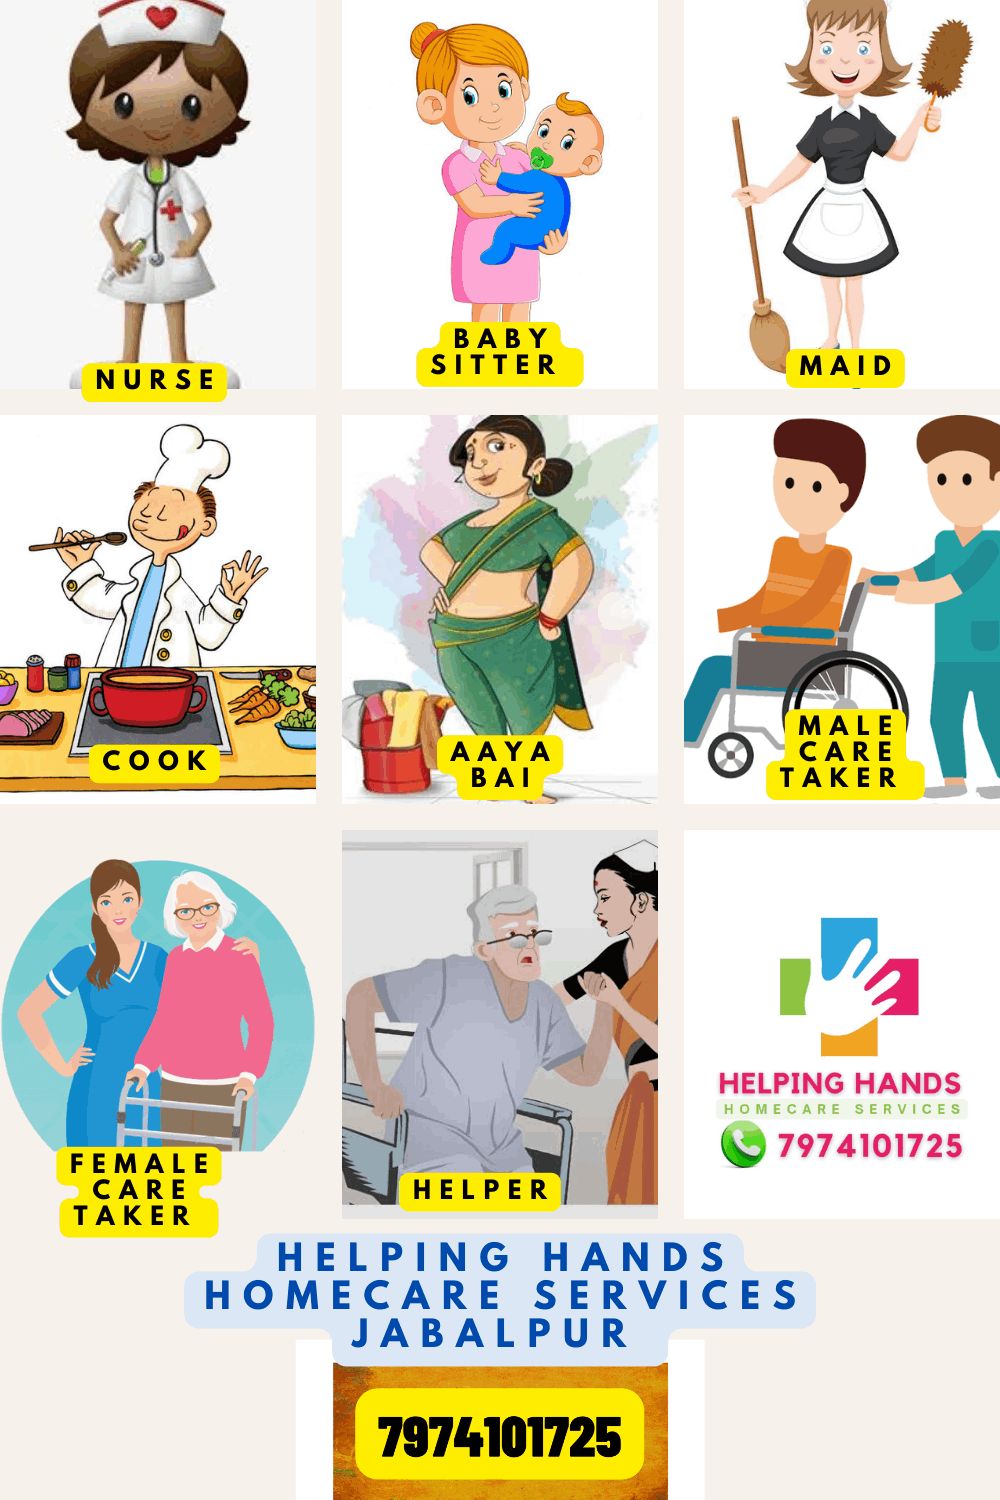 Maid/ Domestic help, Cooking service, Other domestic services, Elderly Care, Child Care; Exp: 3 year